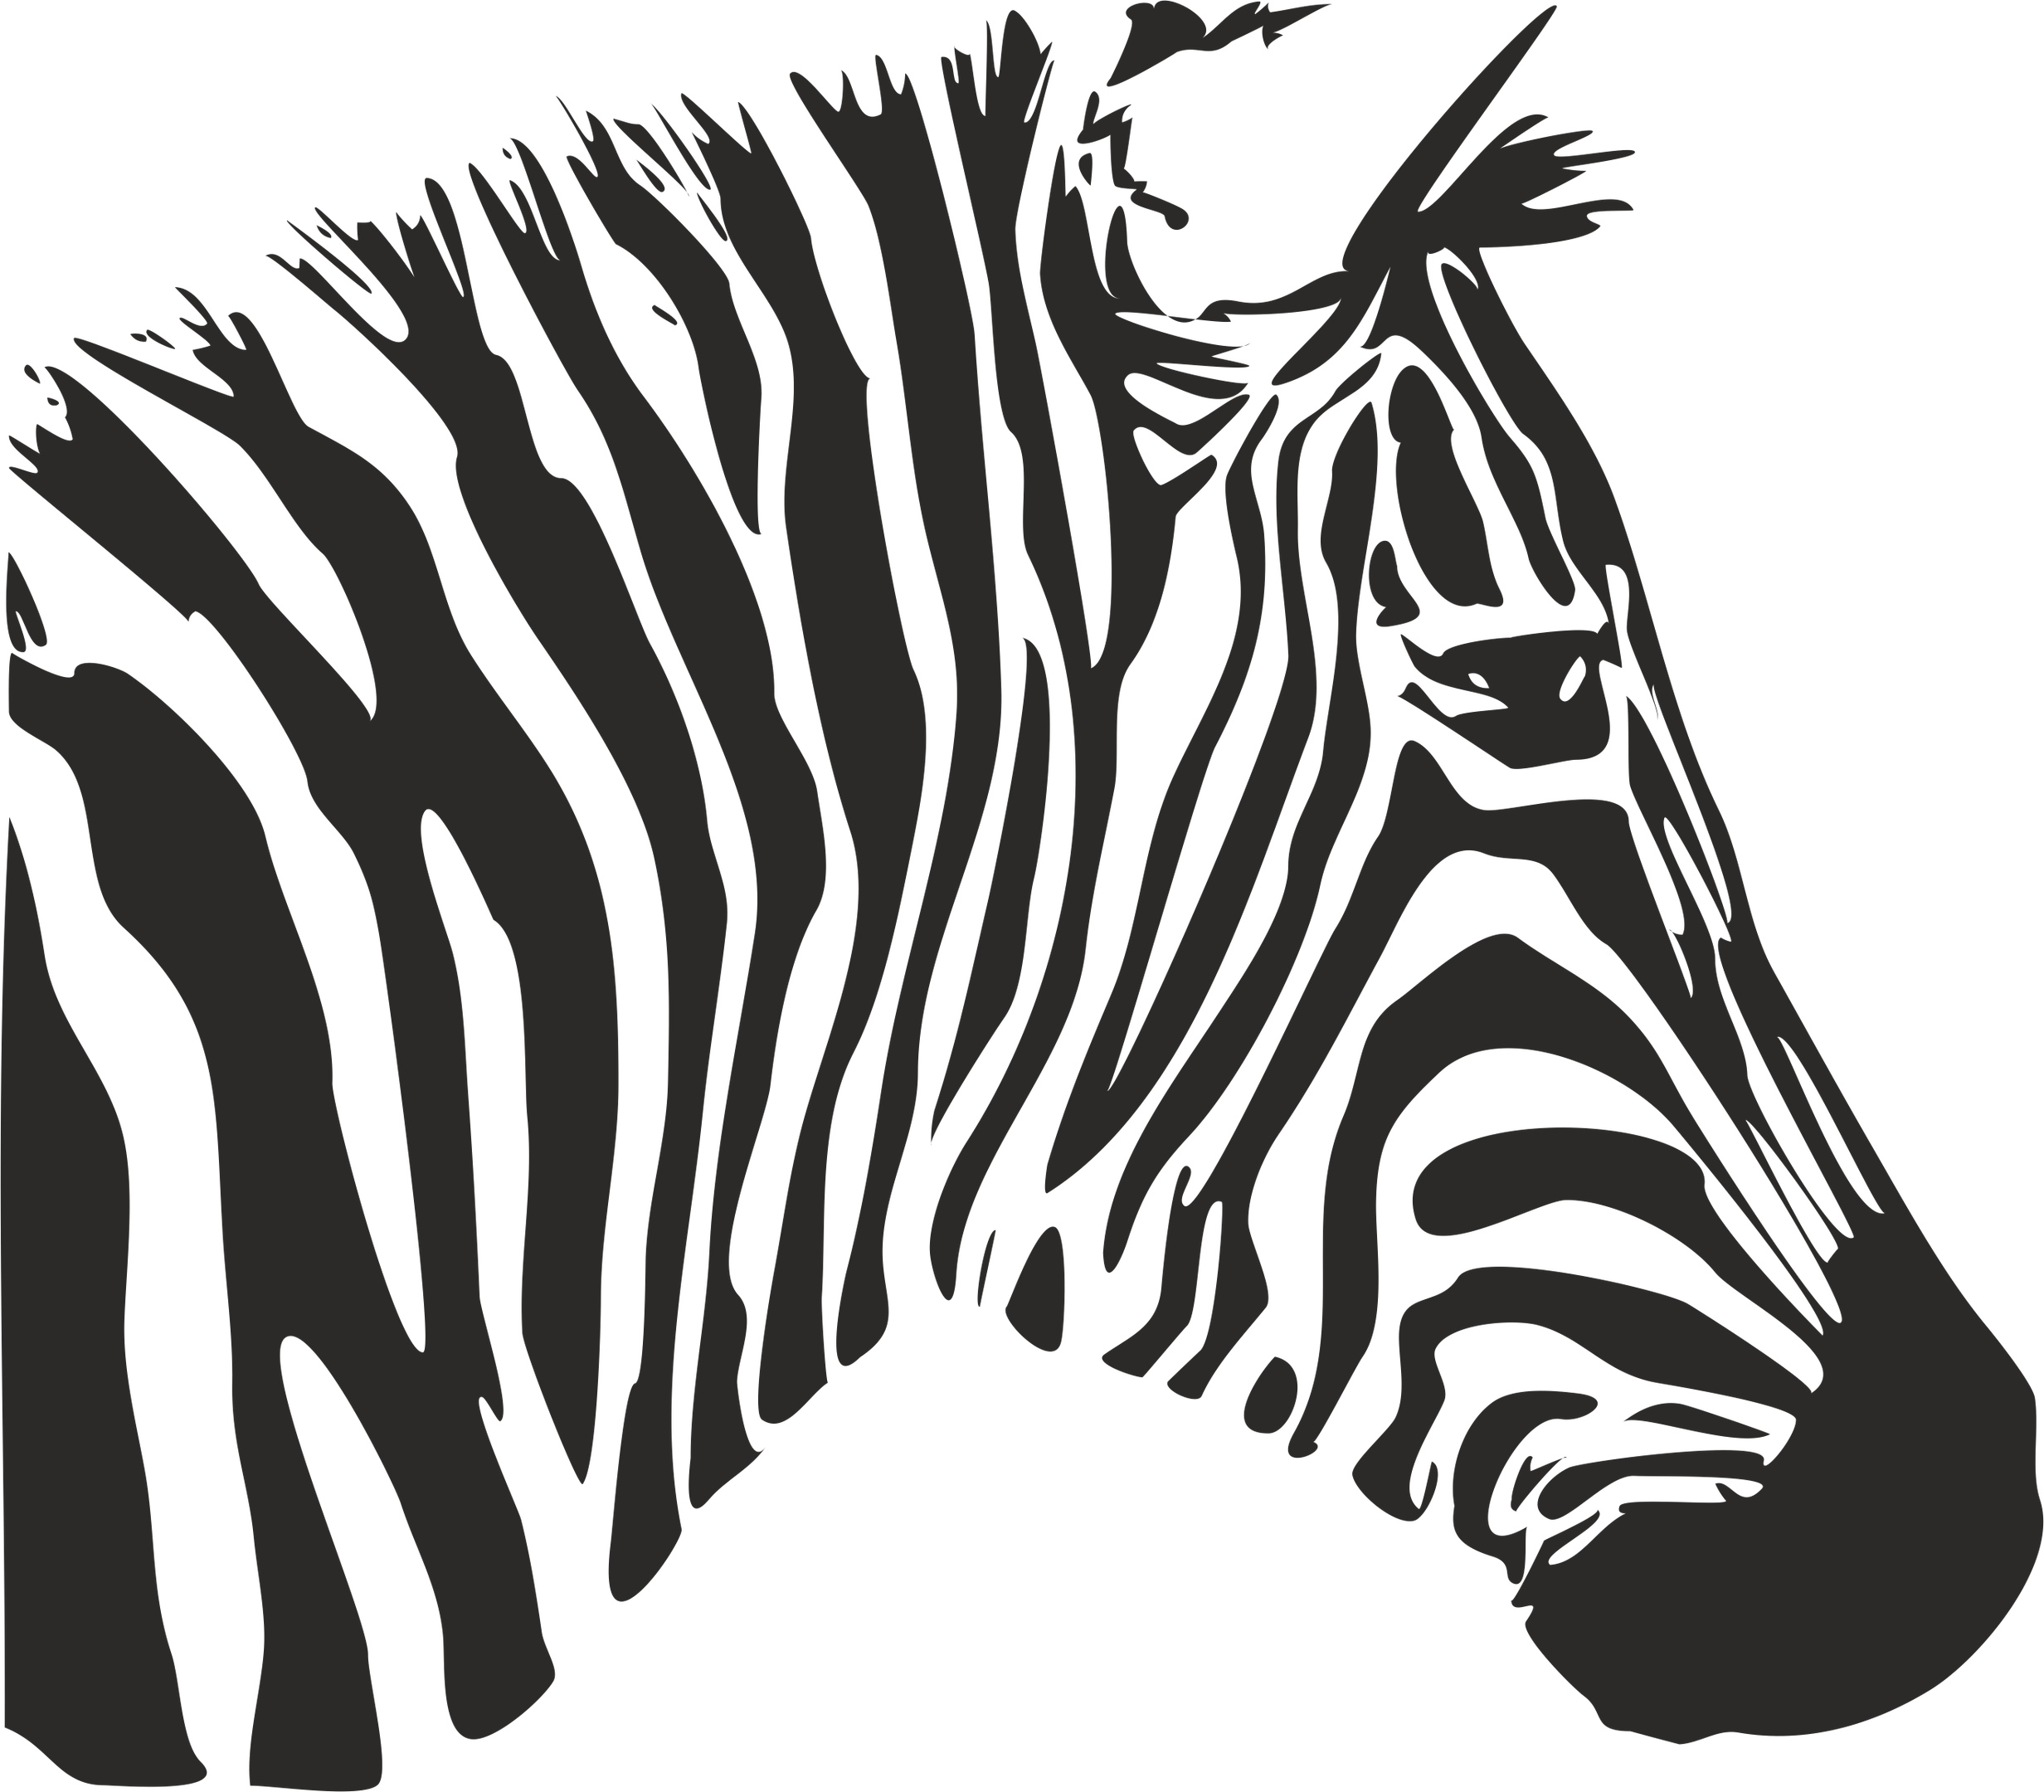 Download Zebra Stencil Free Vector cdr Download - 3axis.co